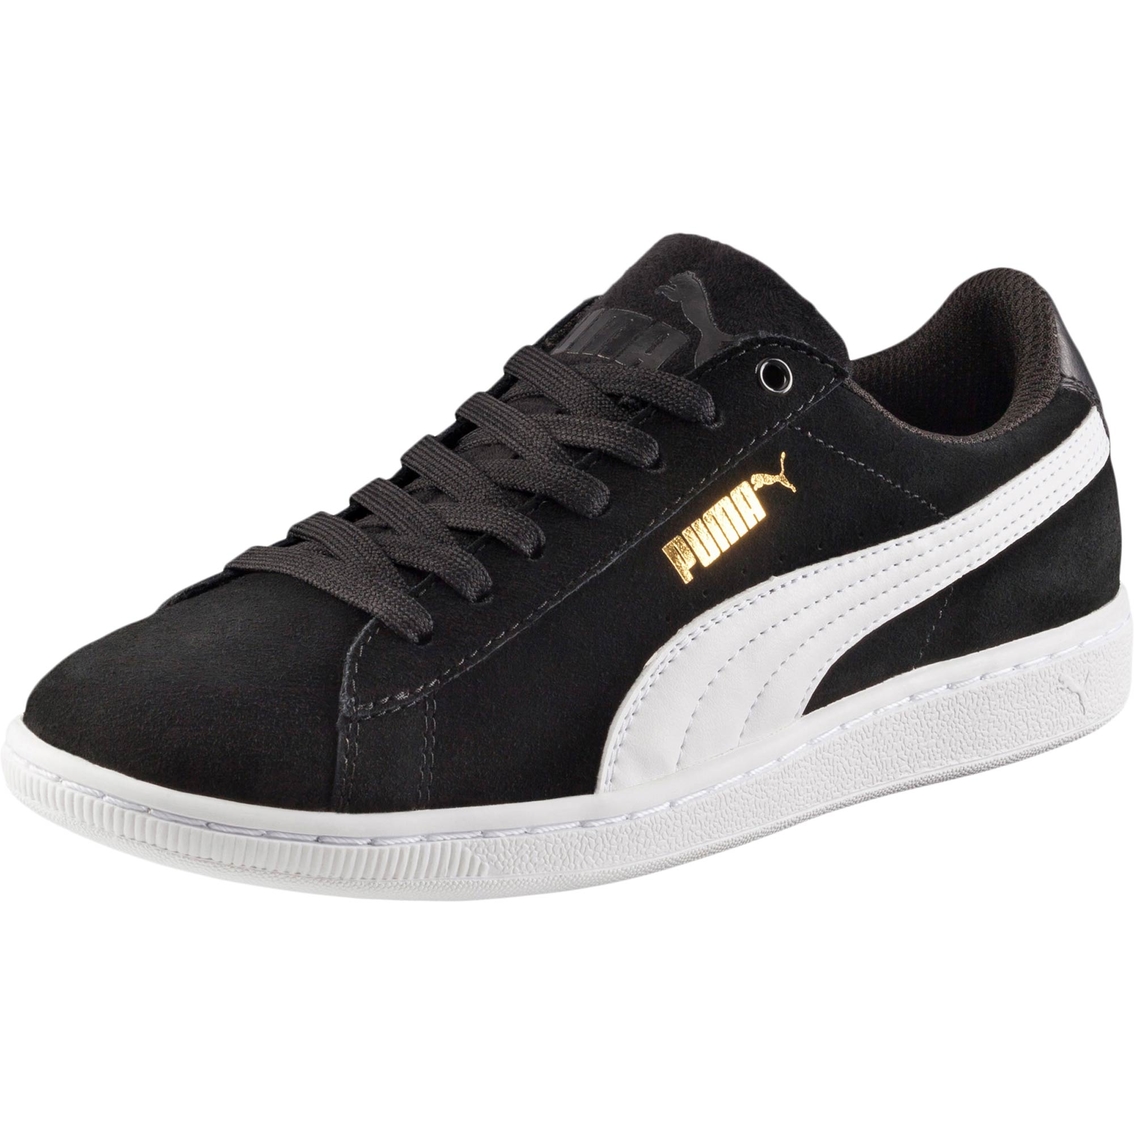 Puma Women's Vikky Basketball Shoes | Sneakers | Shoes ...